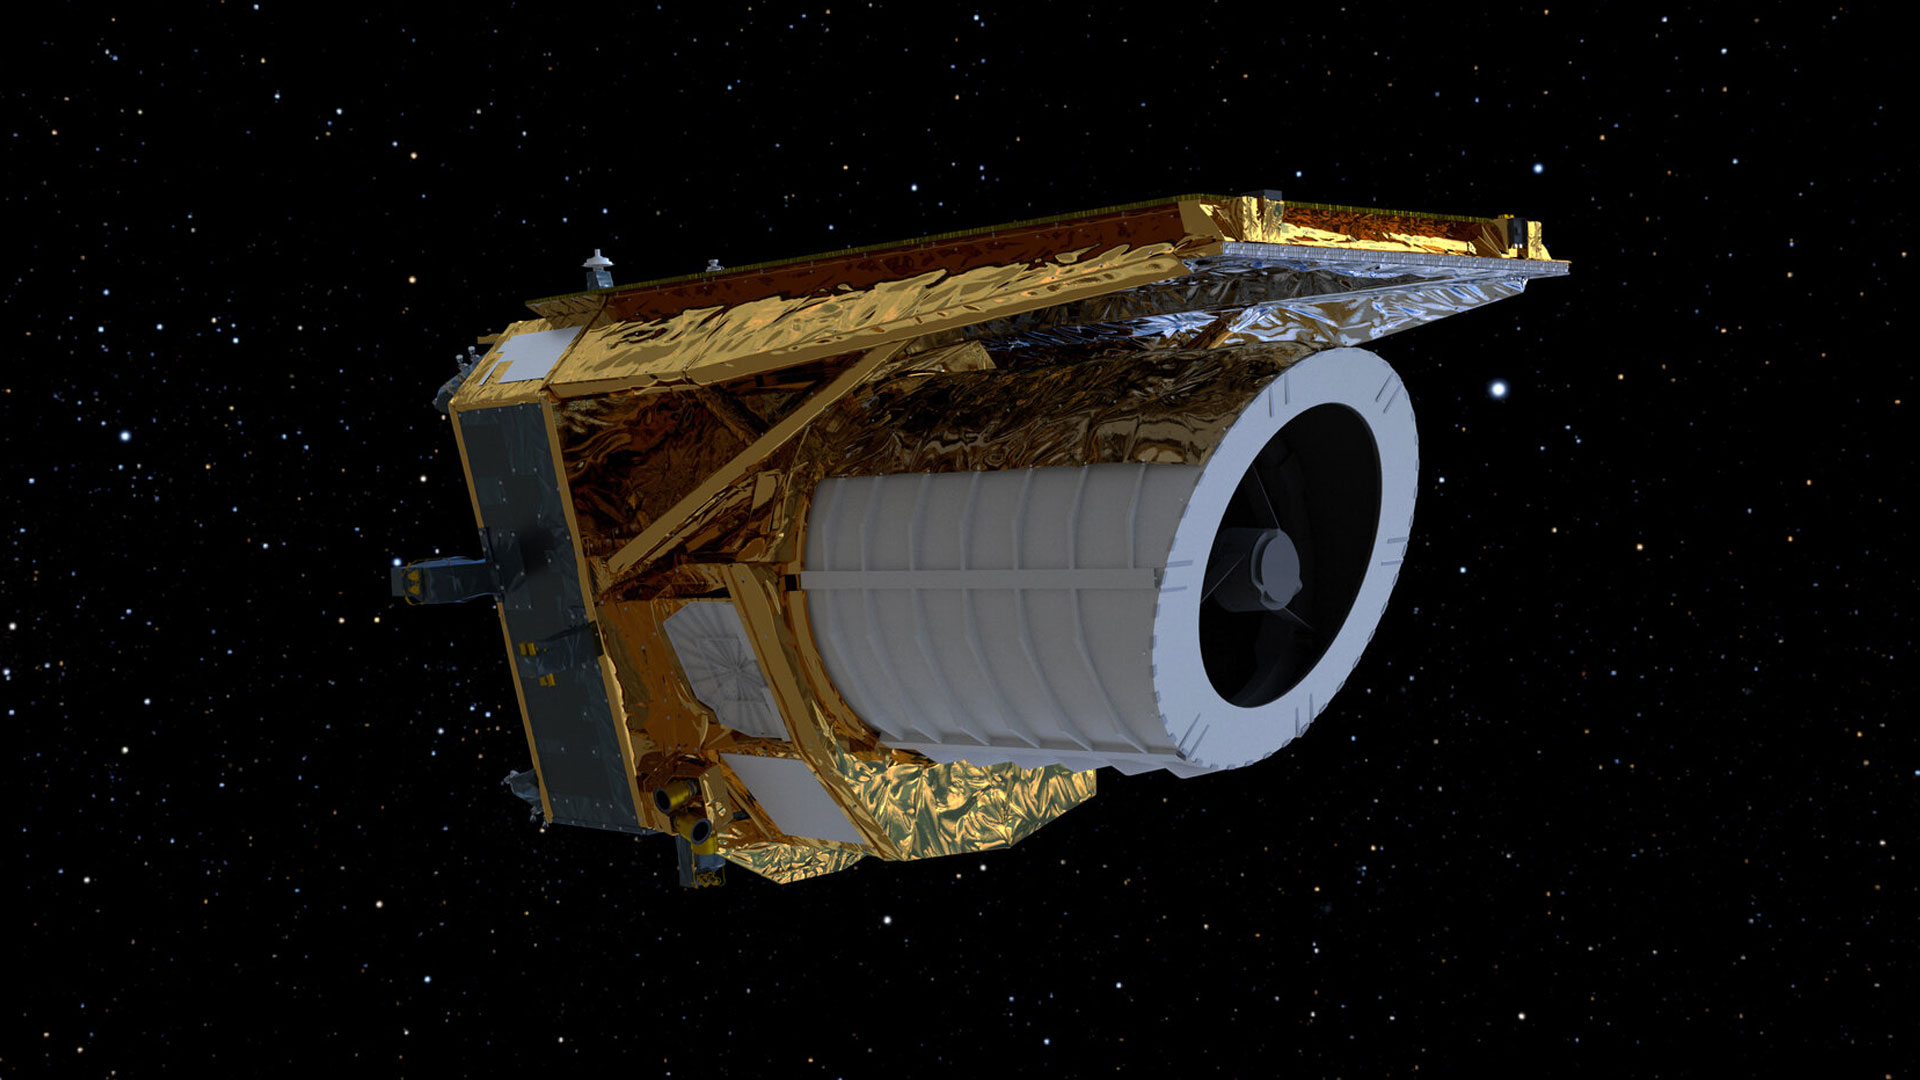 ESA has revealed that a few thin layers of ice have formed on the optics of its Euclid telescope, impacting its operations.